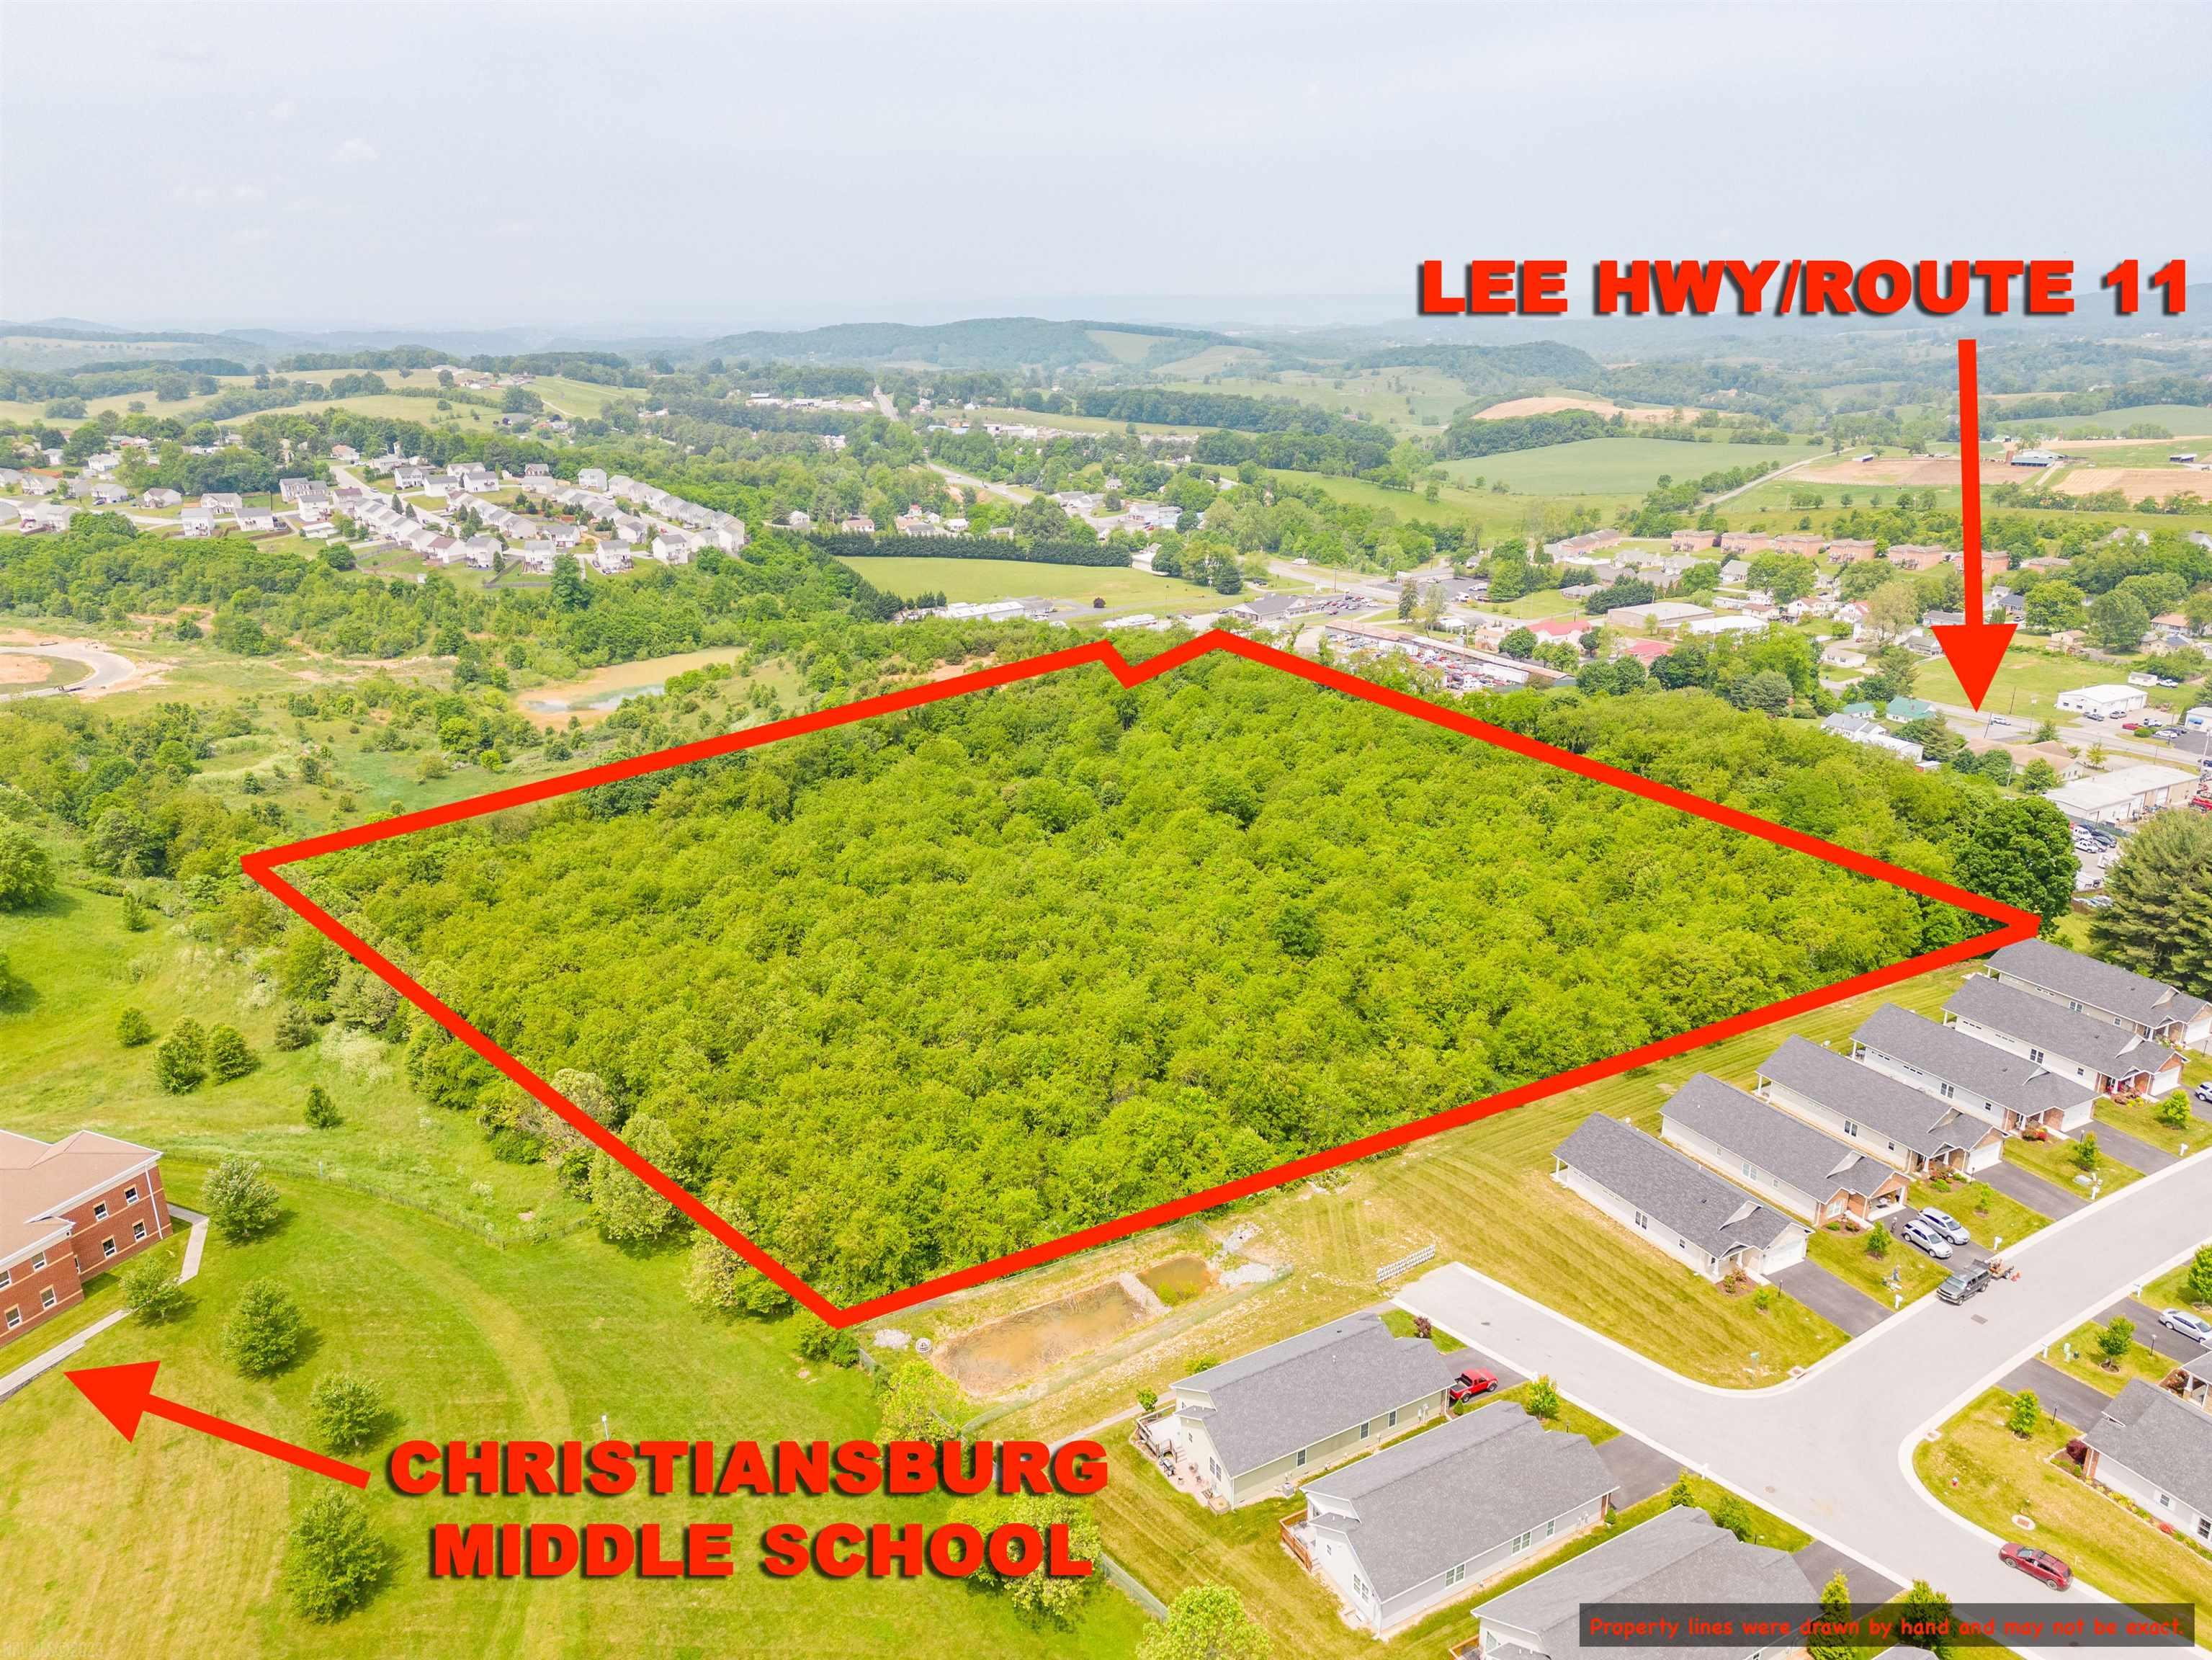 This property possesses absolutely tremendous location as it sits just a mile and a half drive from I81 and a quarter mile off Rt. 11. Not only that it also neighbors Christiansburg Middle School, the Harkrader Sports complex, as well sitting directly between the Windsong Heights and Kensington developments. This 8+ acre wooded tract is ripe for opportunity and sits right in the perfect path for a new housing development!